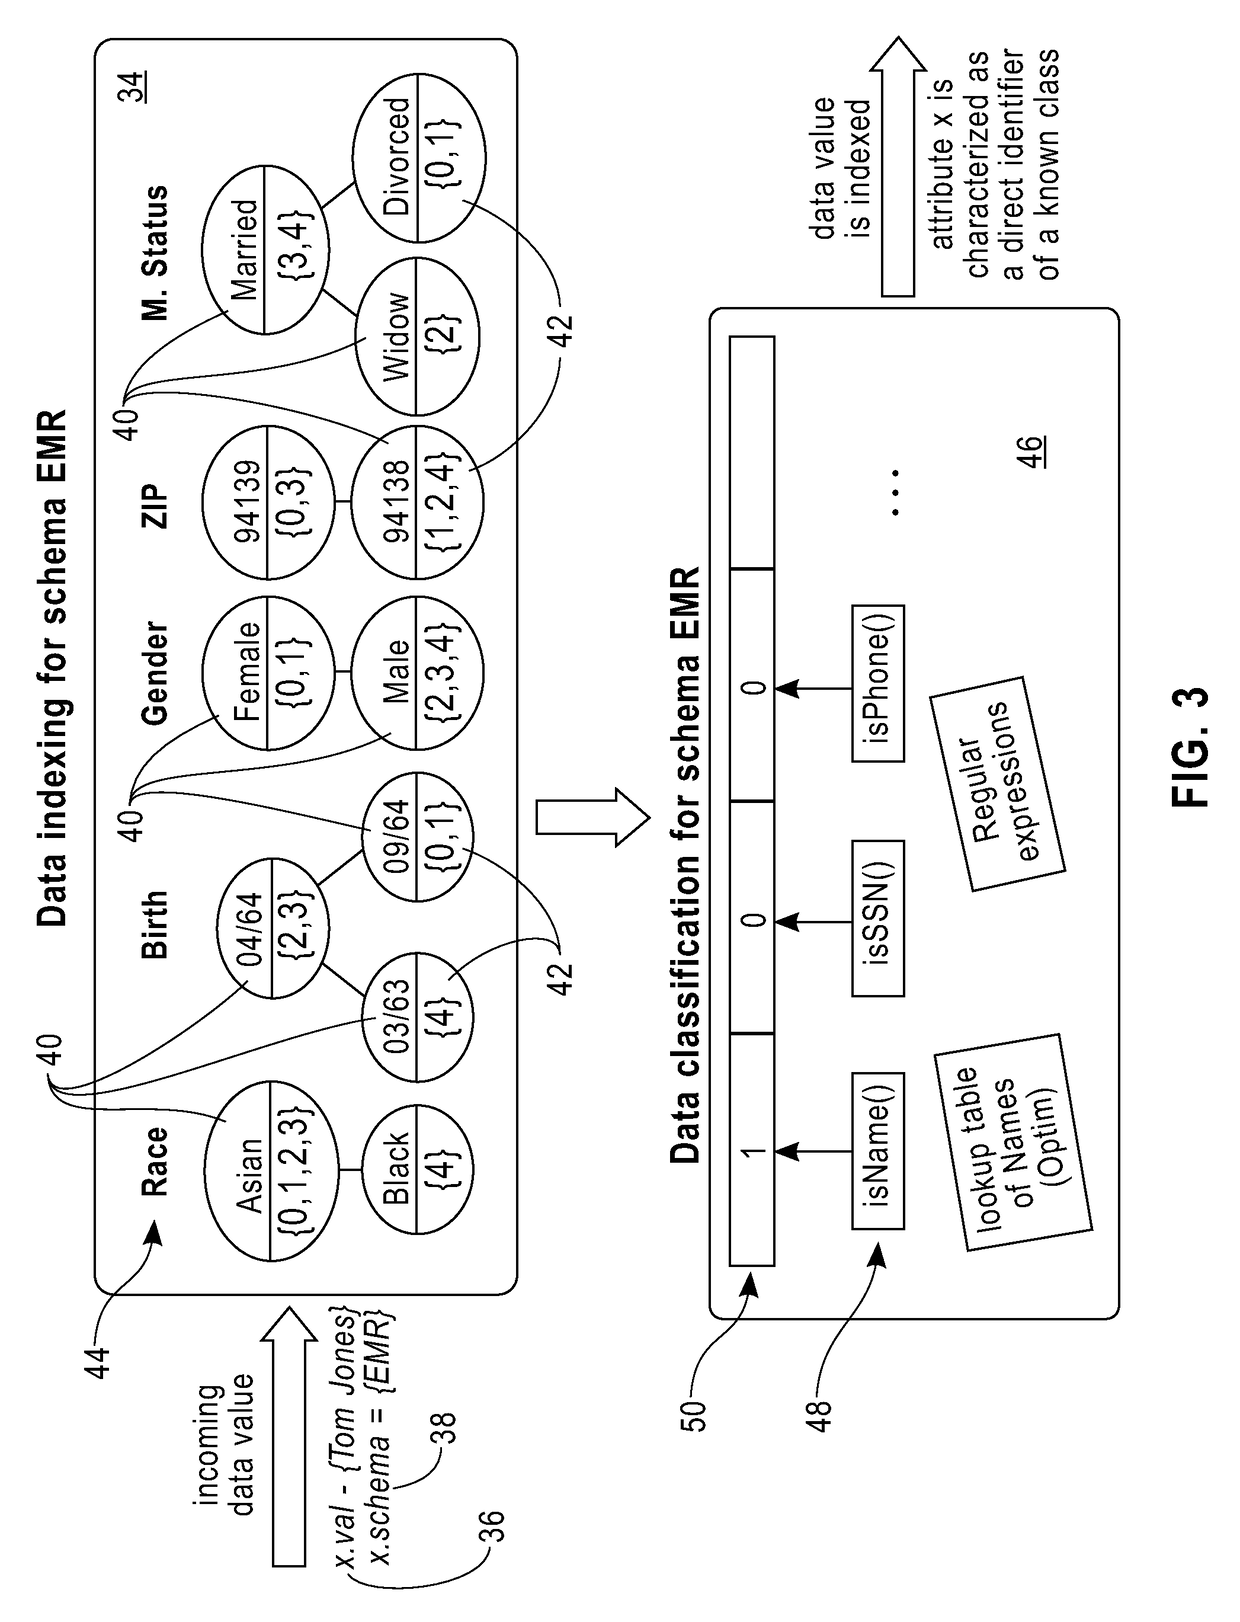 Method/system for the online identification and blocking of privacy vulnerabilities in data streams